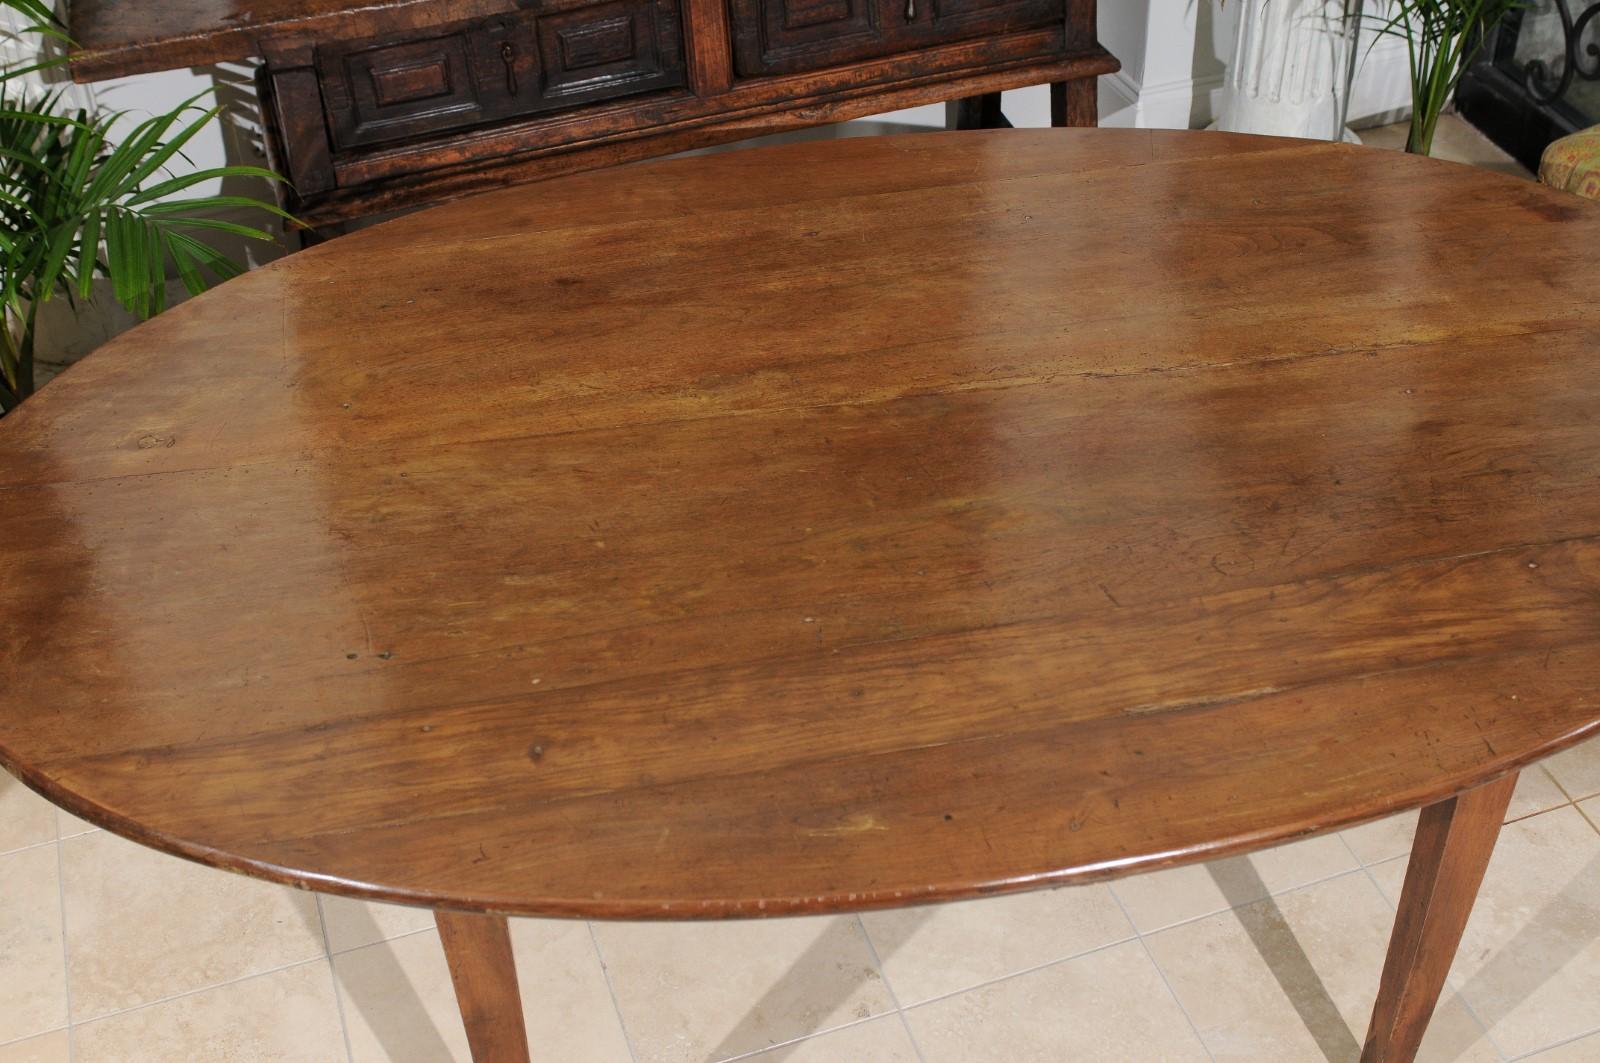  French Oval Farm Table with Tapered Legs 7